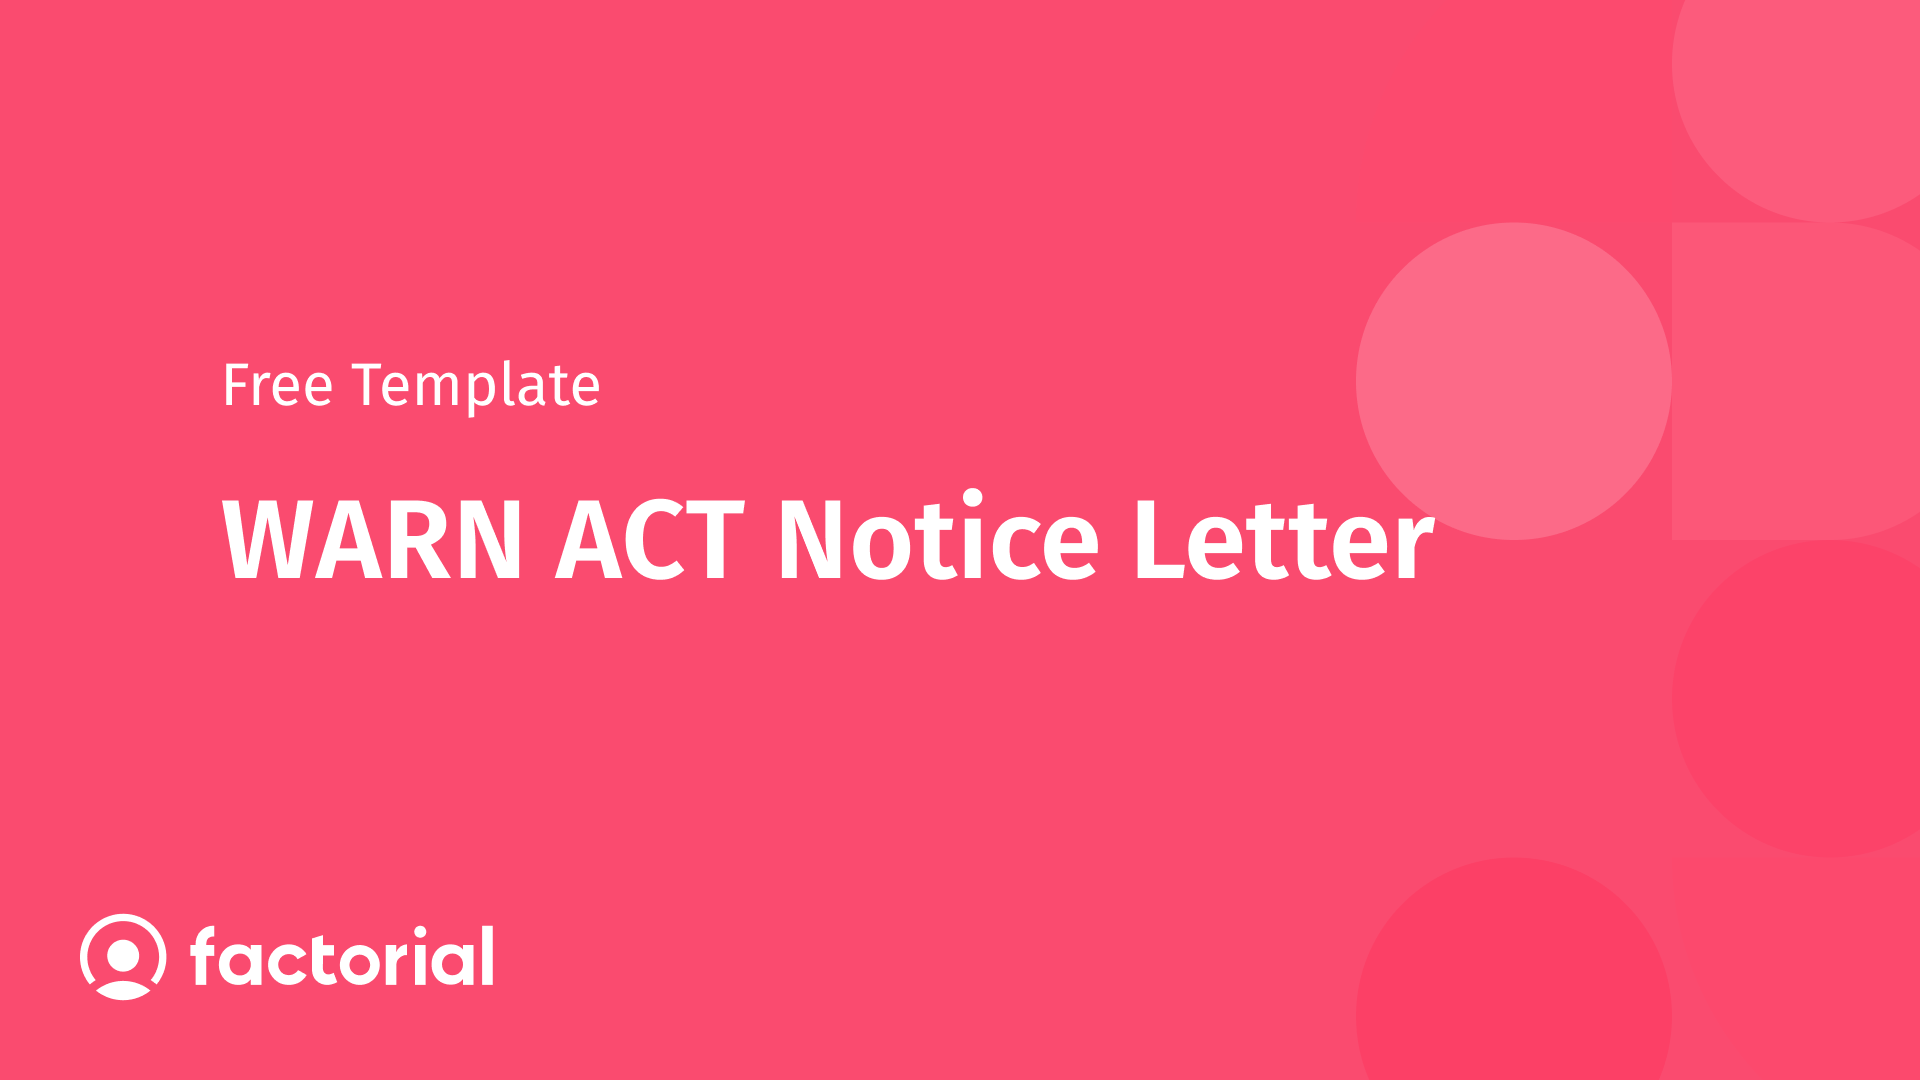 warn act notice letter